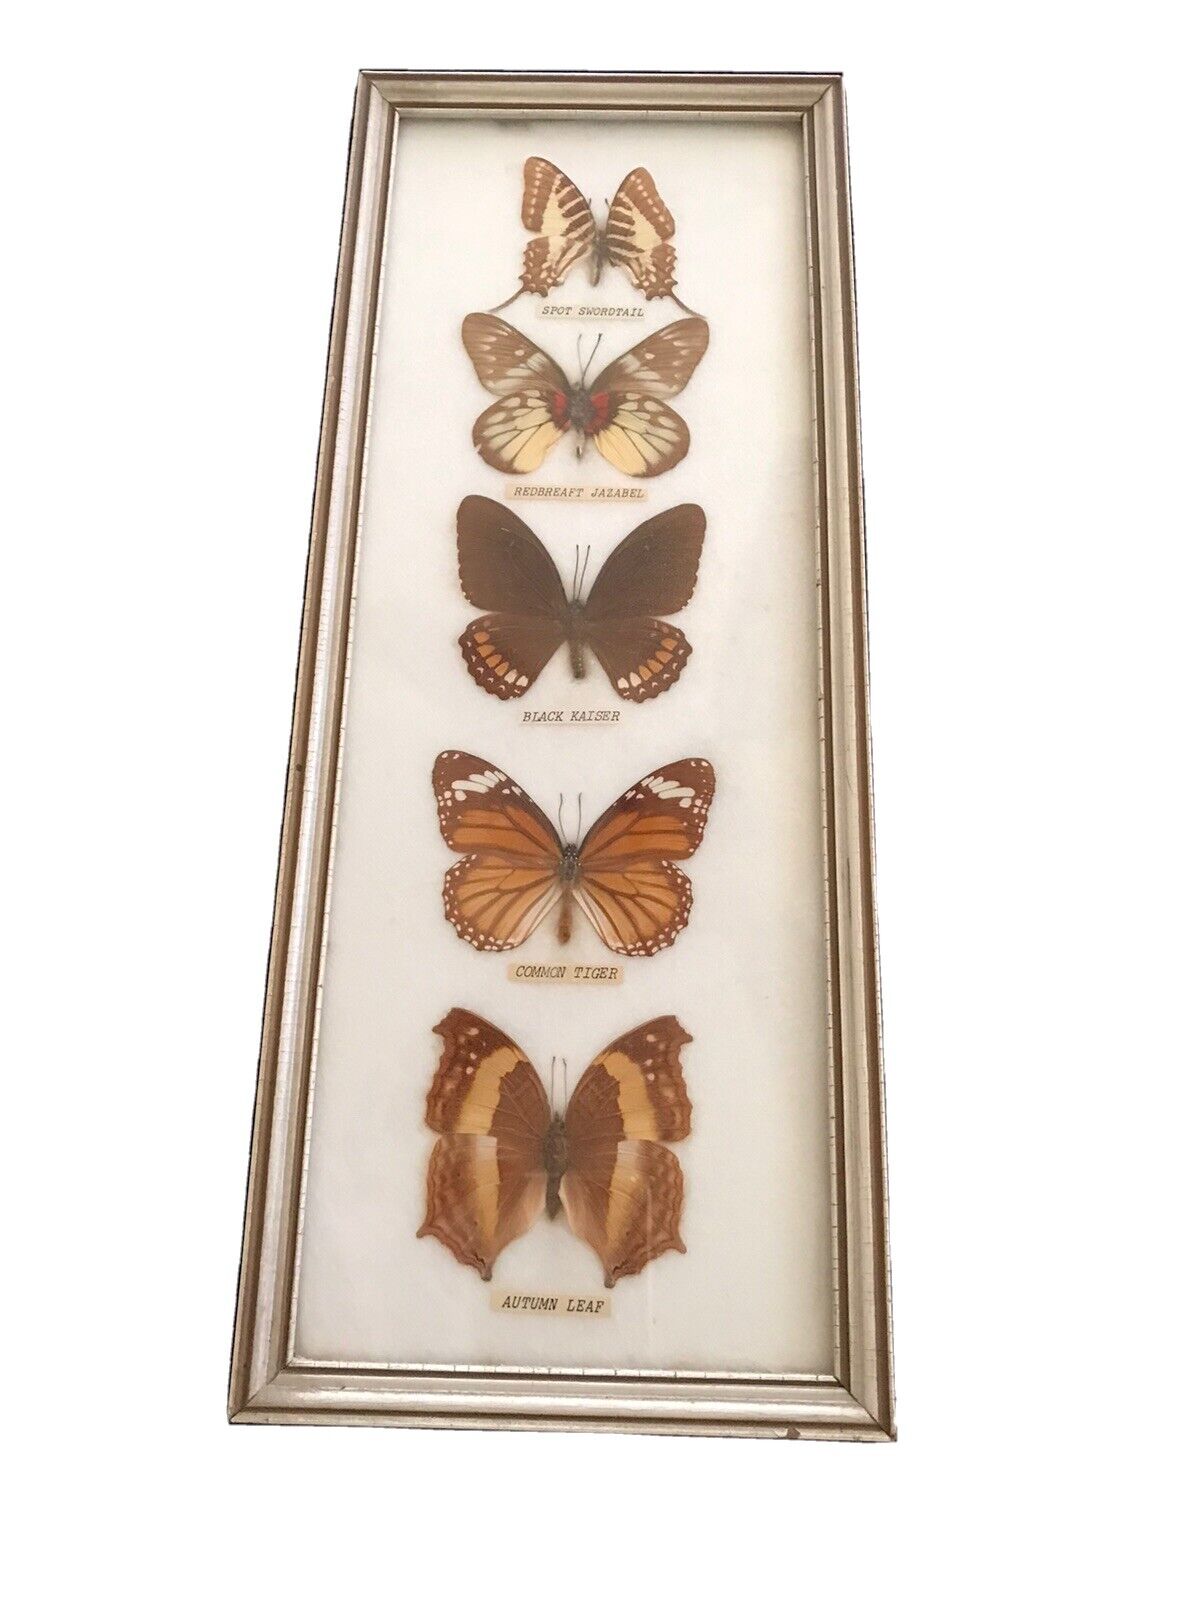 vintage real framed butterflies. each butterfly labeled as to type.nicely framed